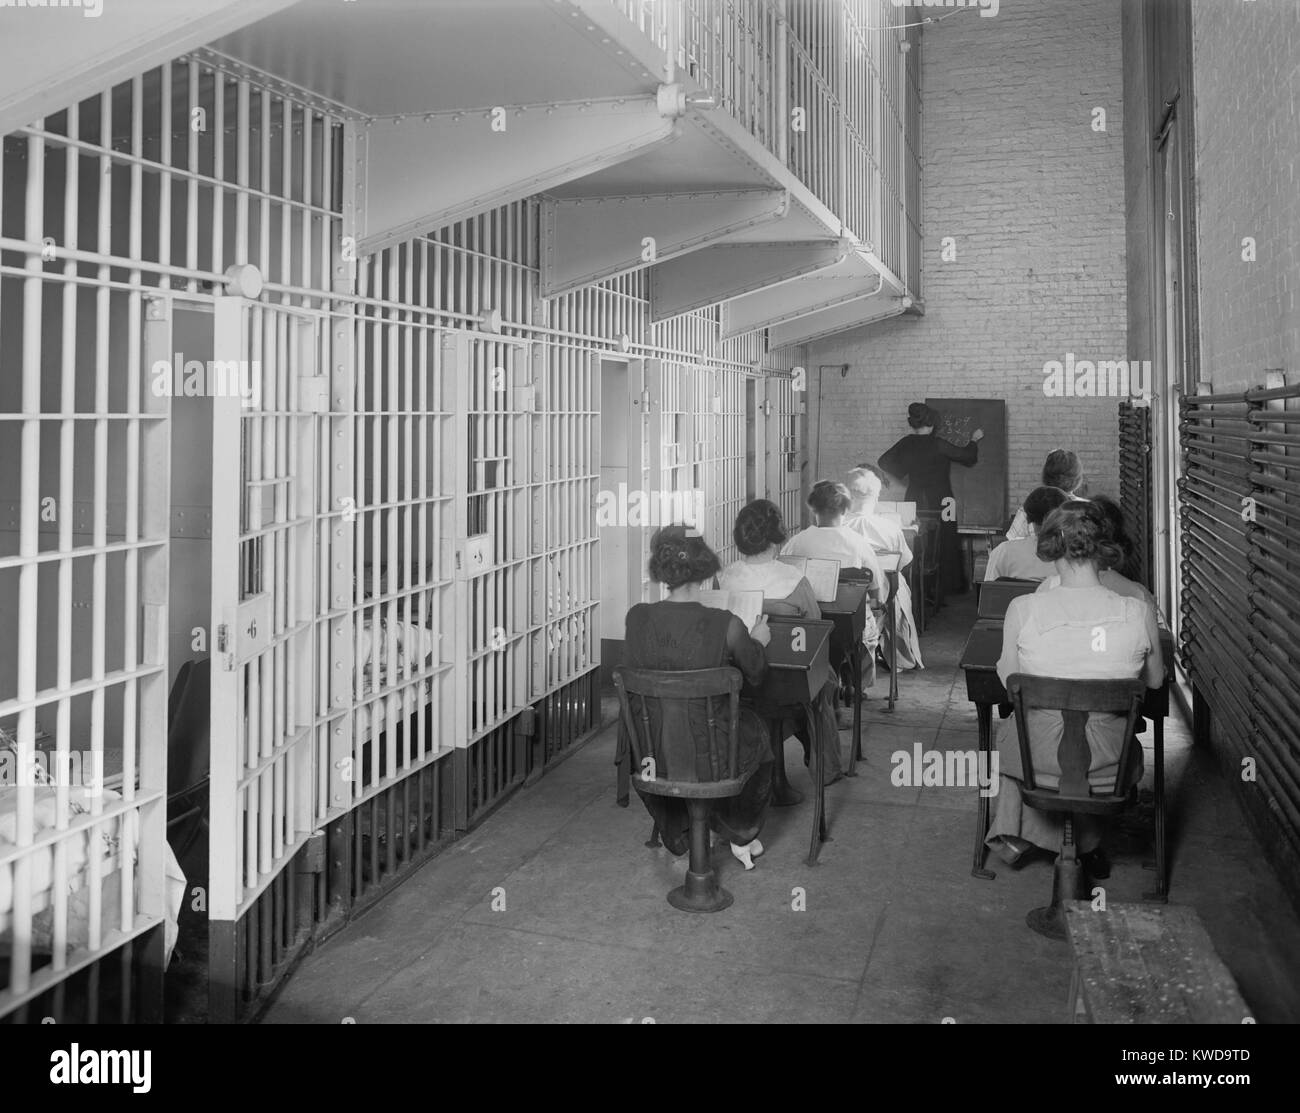 Young women at desks in an American jail c. 1920. Dressed in street clothing, they sit in two rows of desks in a cellblock. The teacher is writing numbers on the blackboard (BSLOC 2016 10 73) Stock Photo